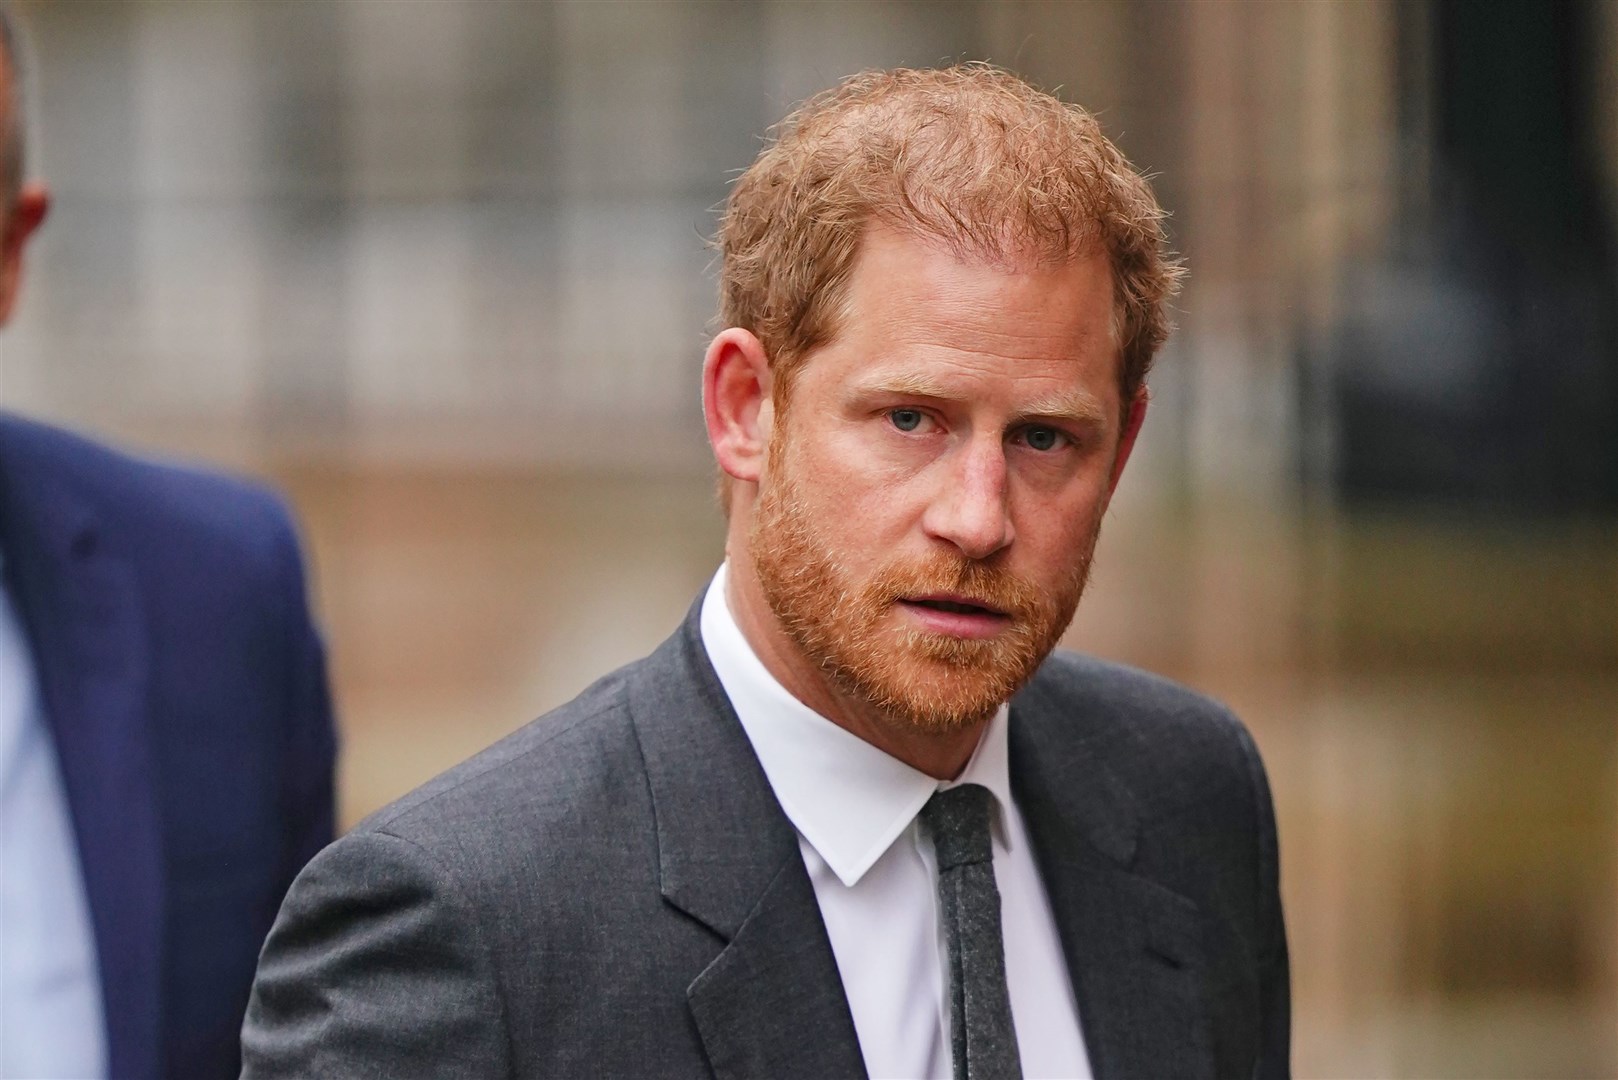 The Duke of Sussex arriving at the Royal Courts Of Justice, central London, on Tuesday (PA)